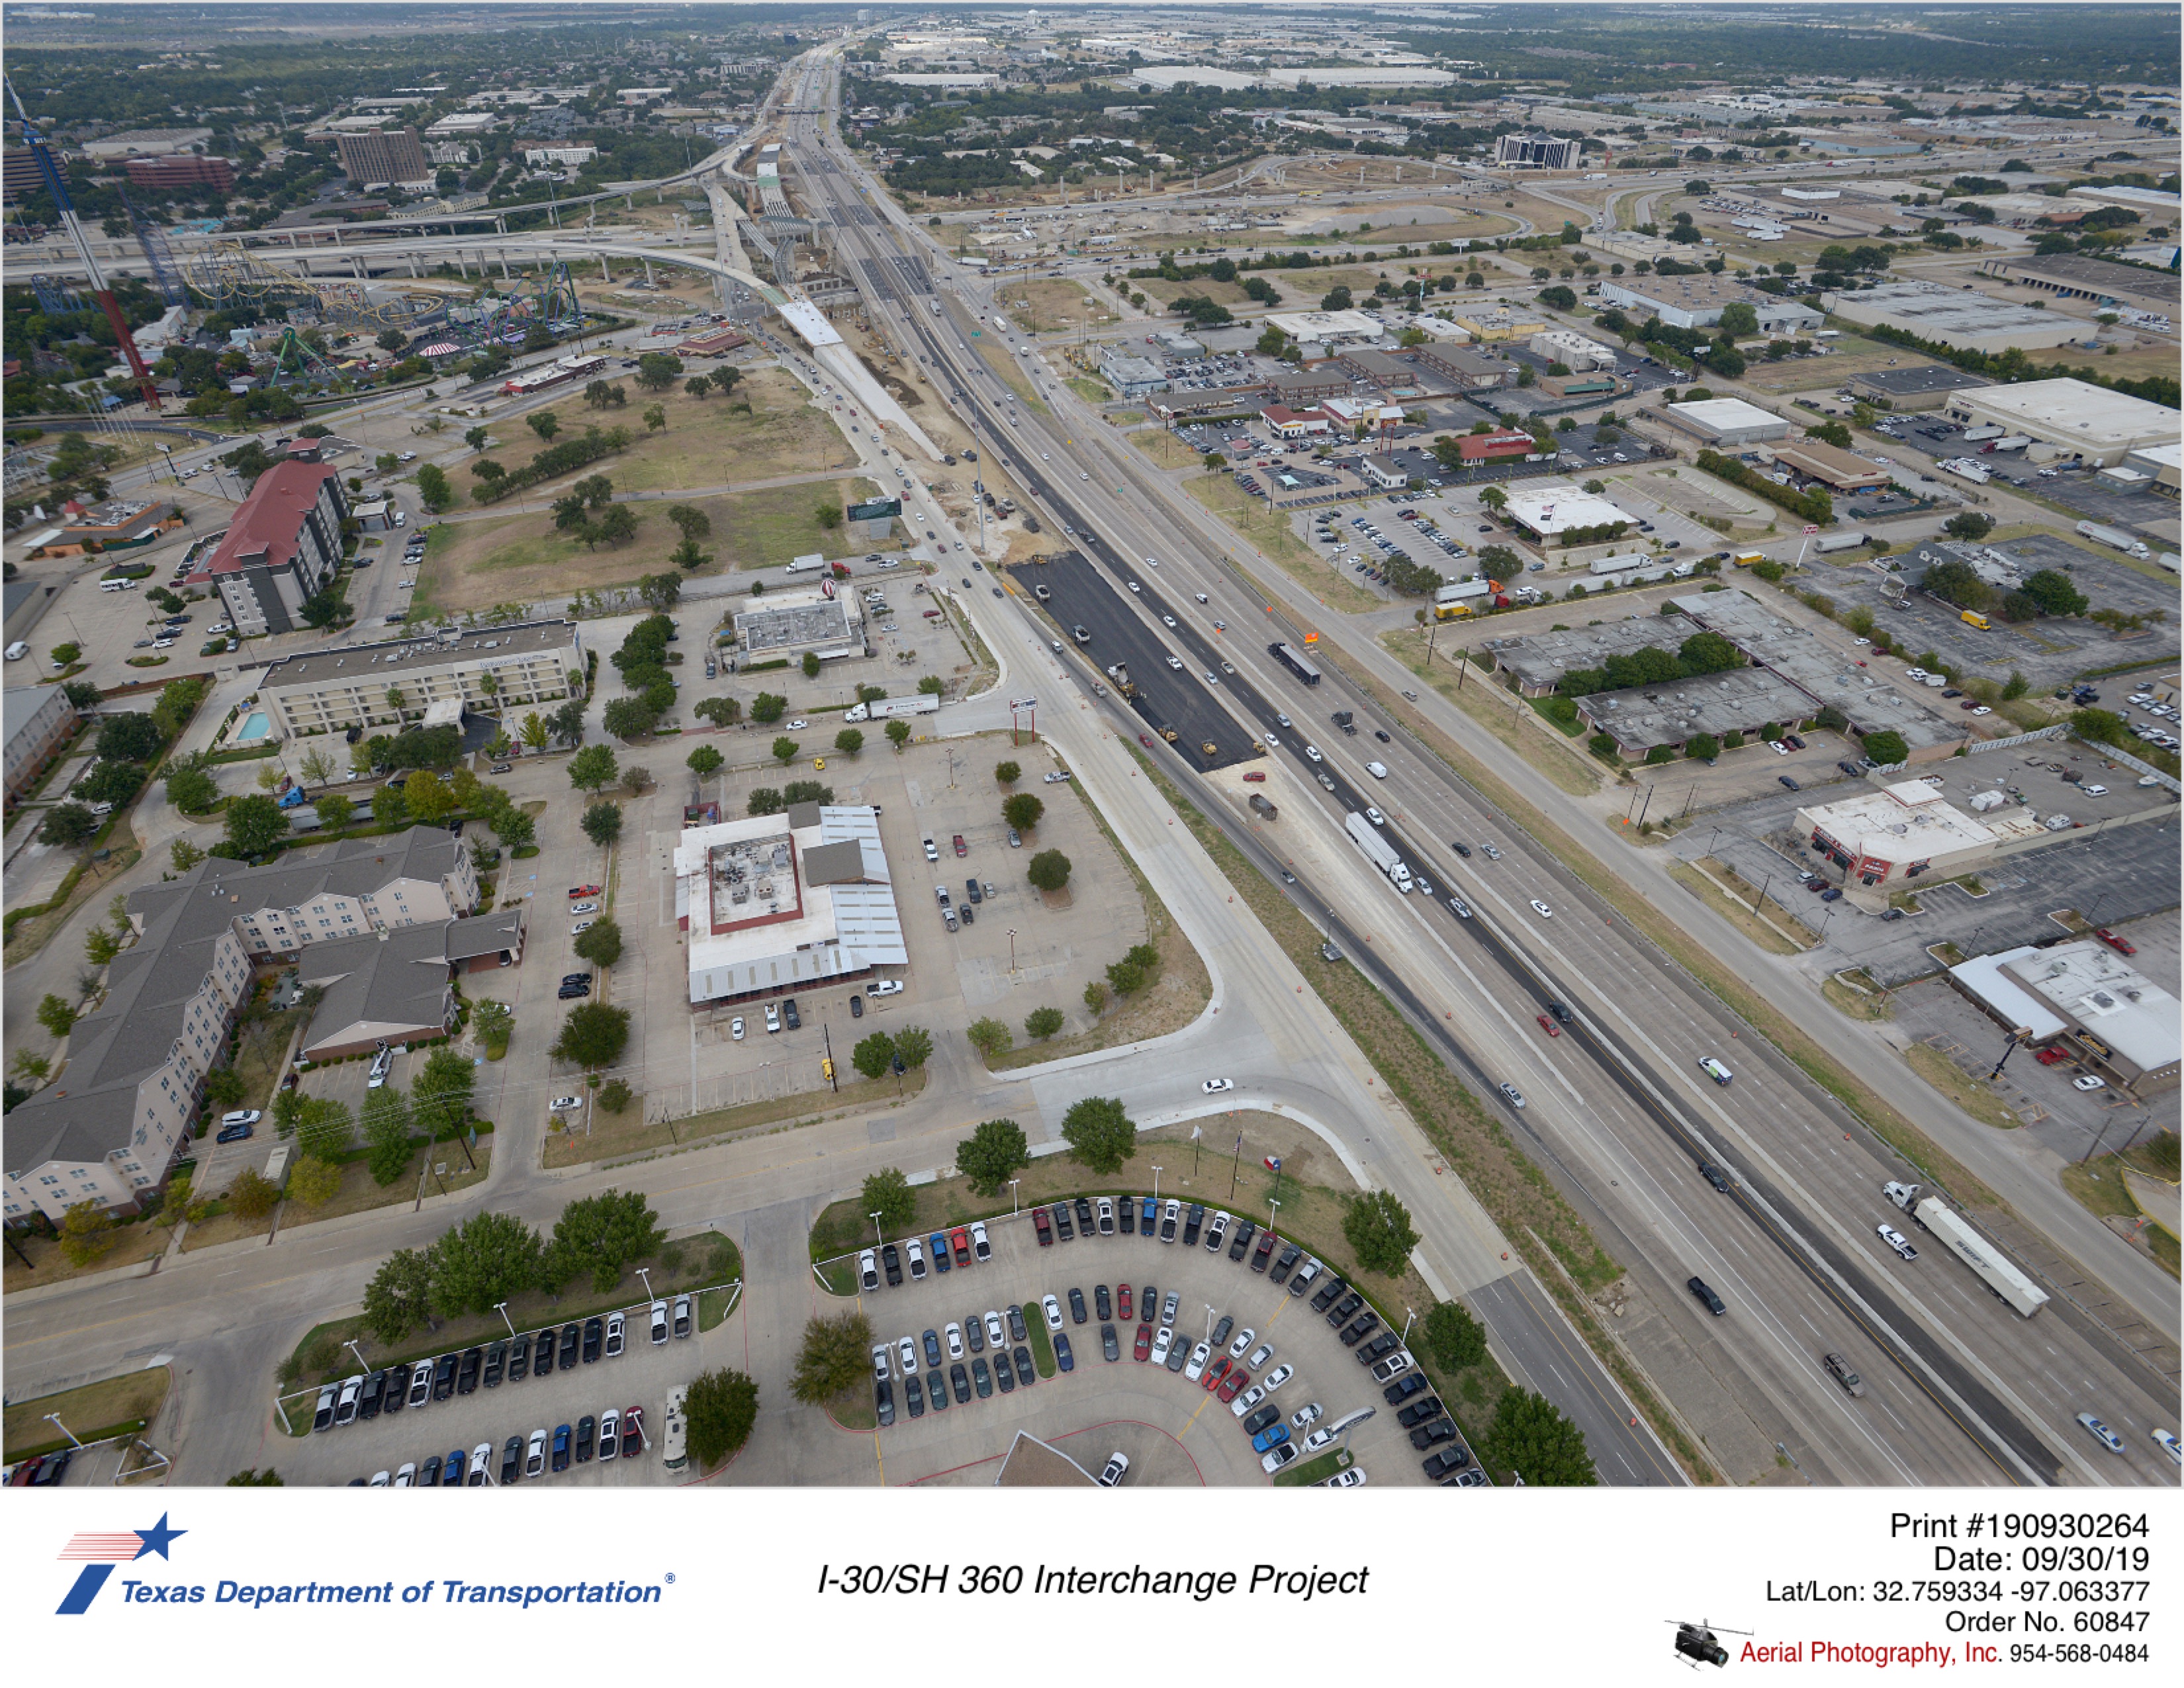 SH 360 looking north to I-30. Construction of direct connector landings for southbound SH 360 mainalnes.